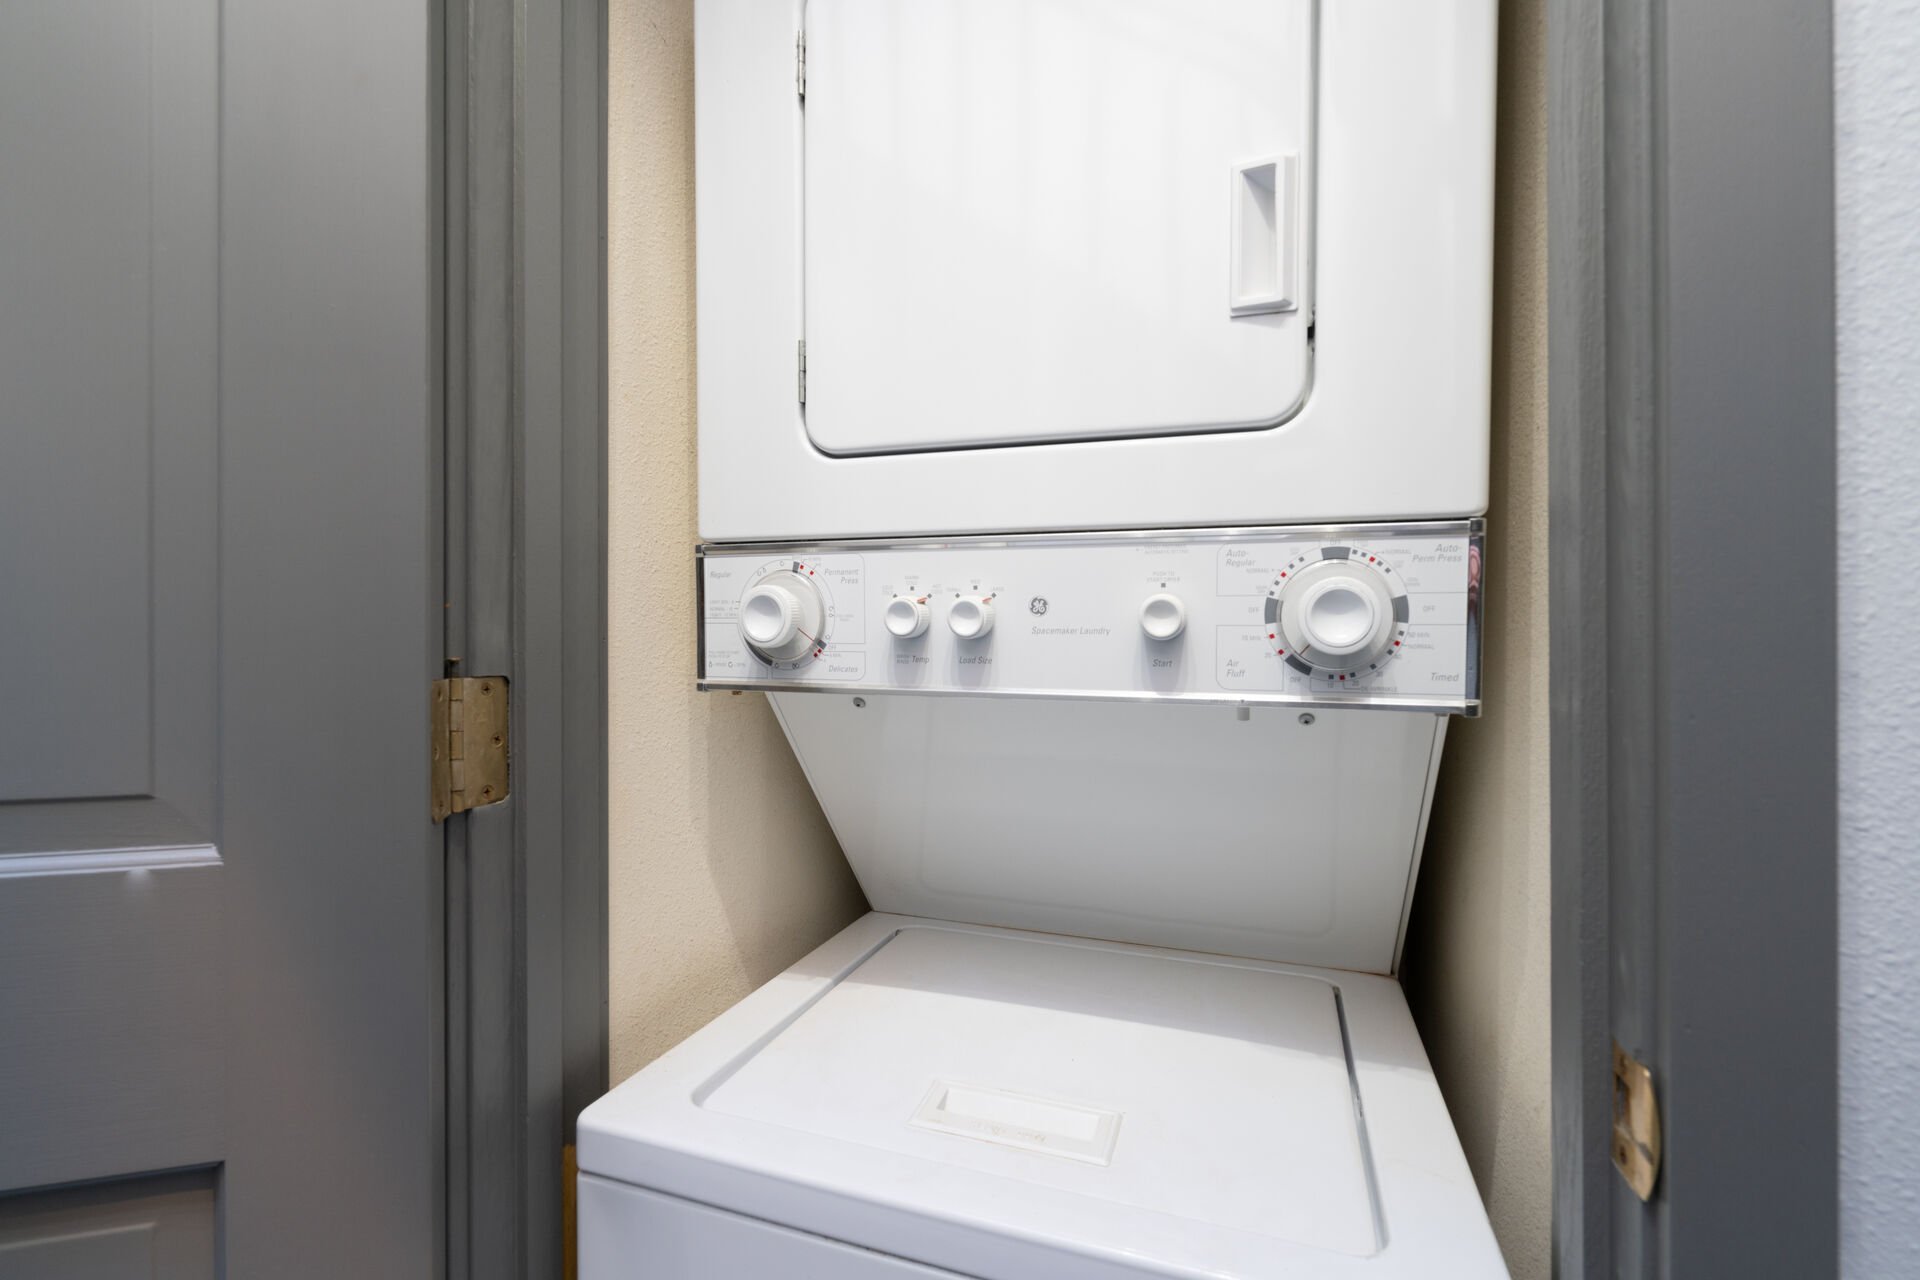 a washer/dryer unit